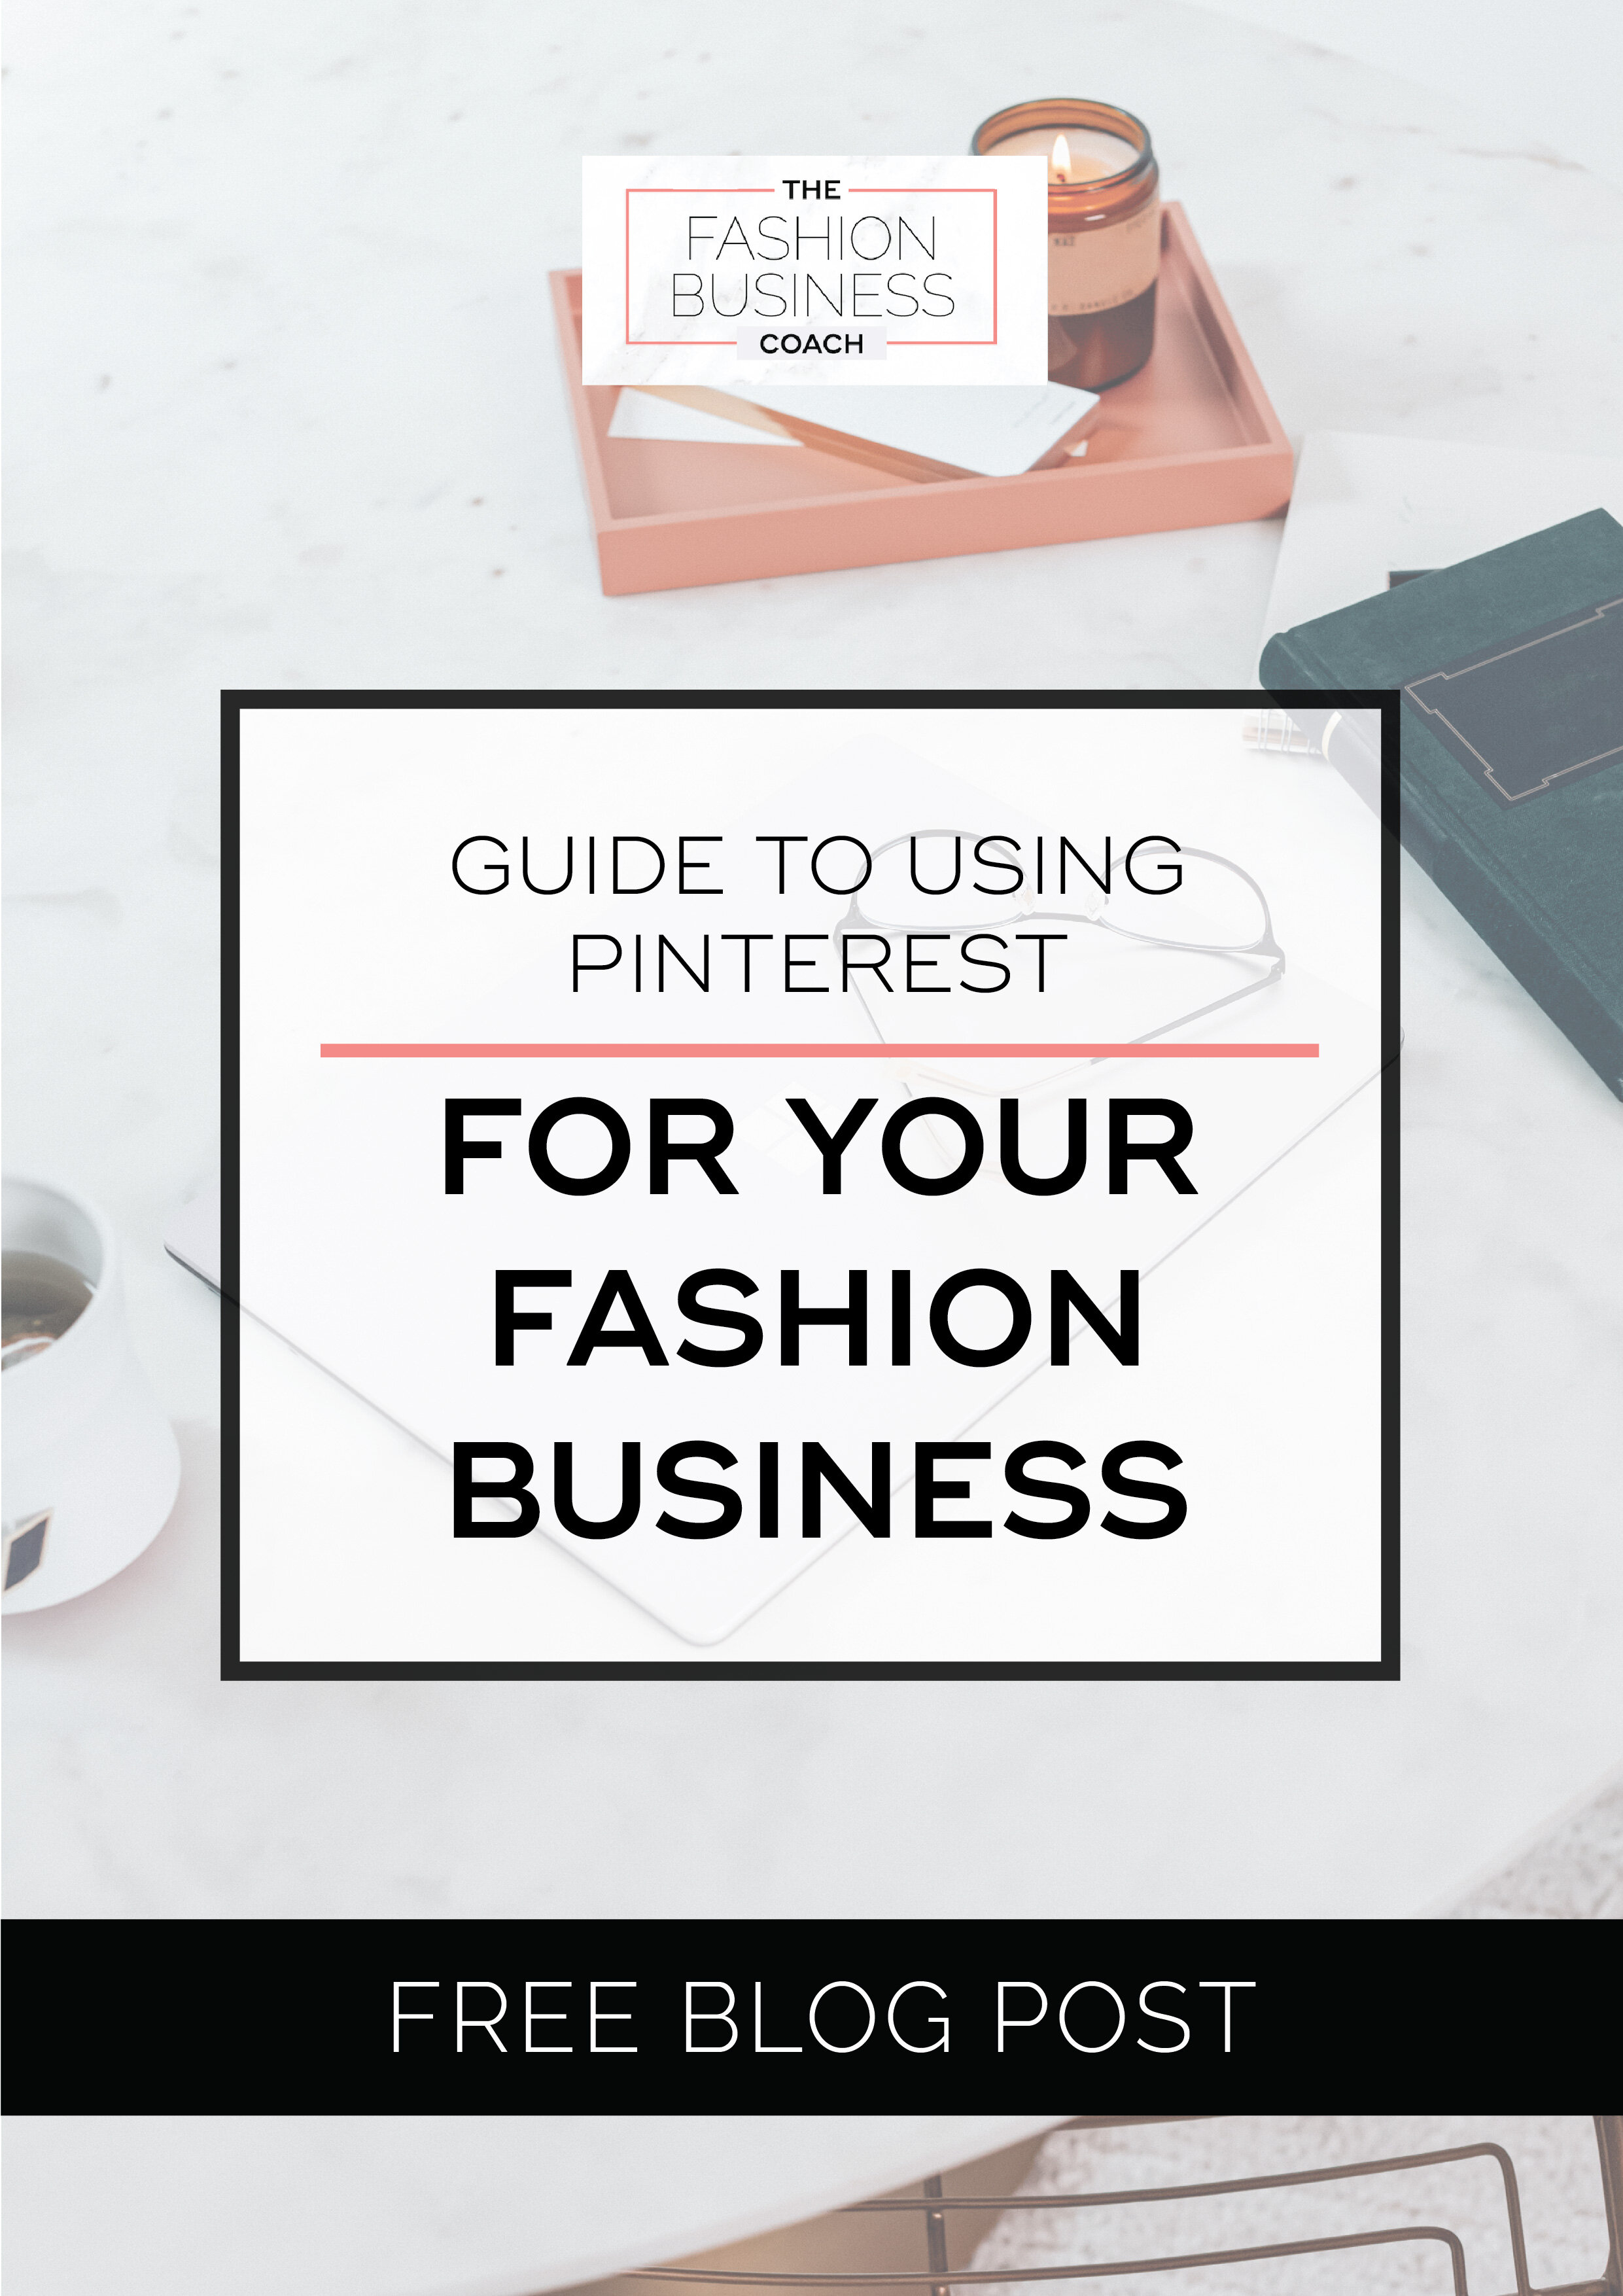 Guide to Using Pinterest for your Fashion Business2.jpg